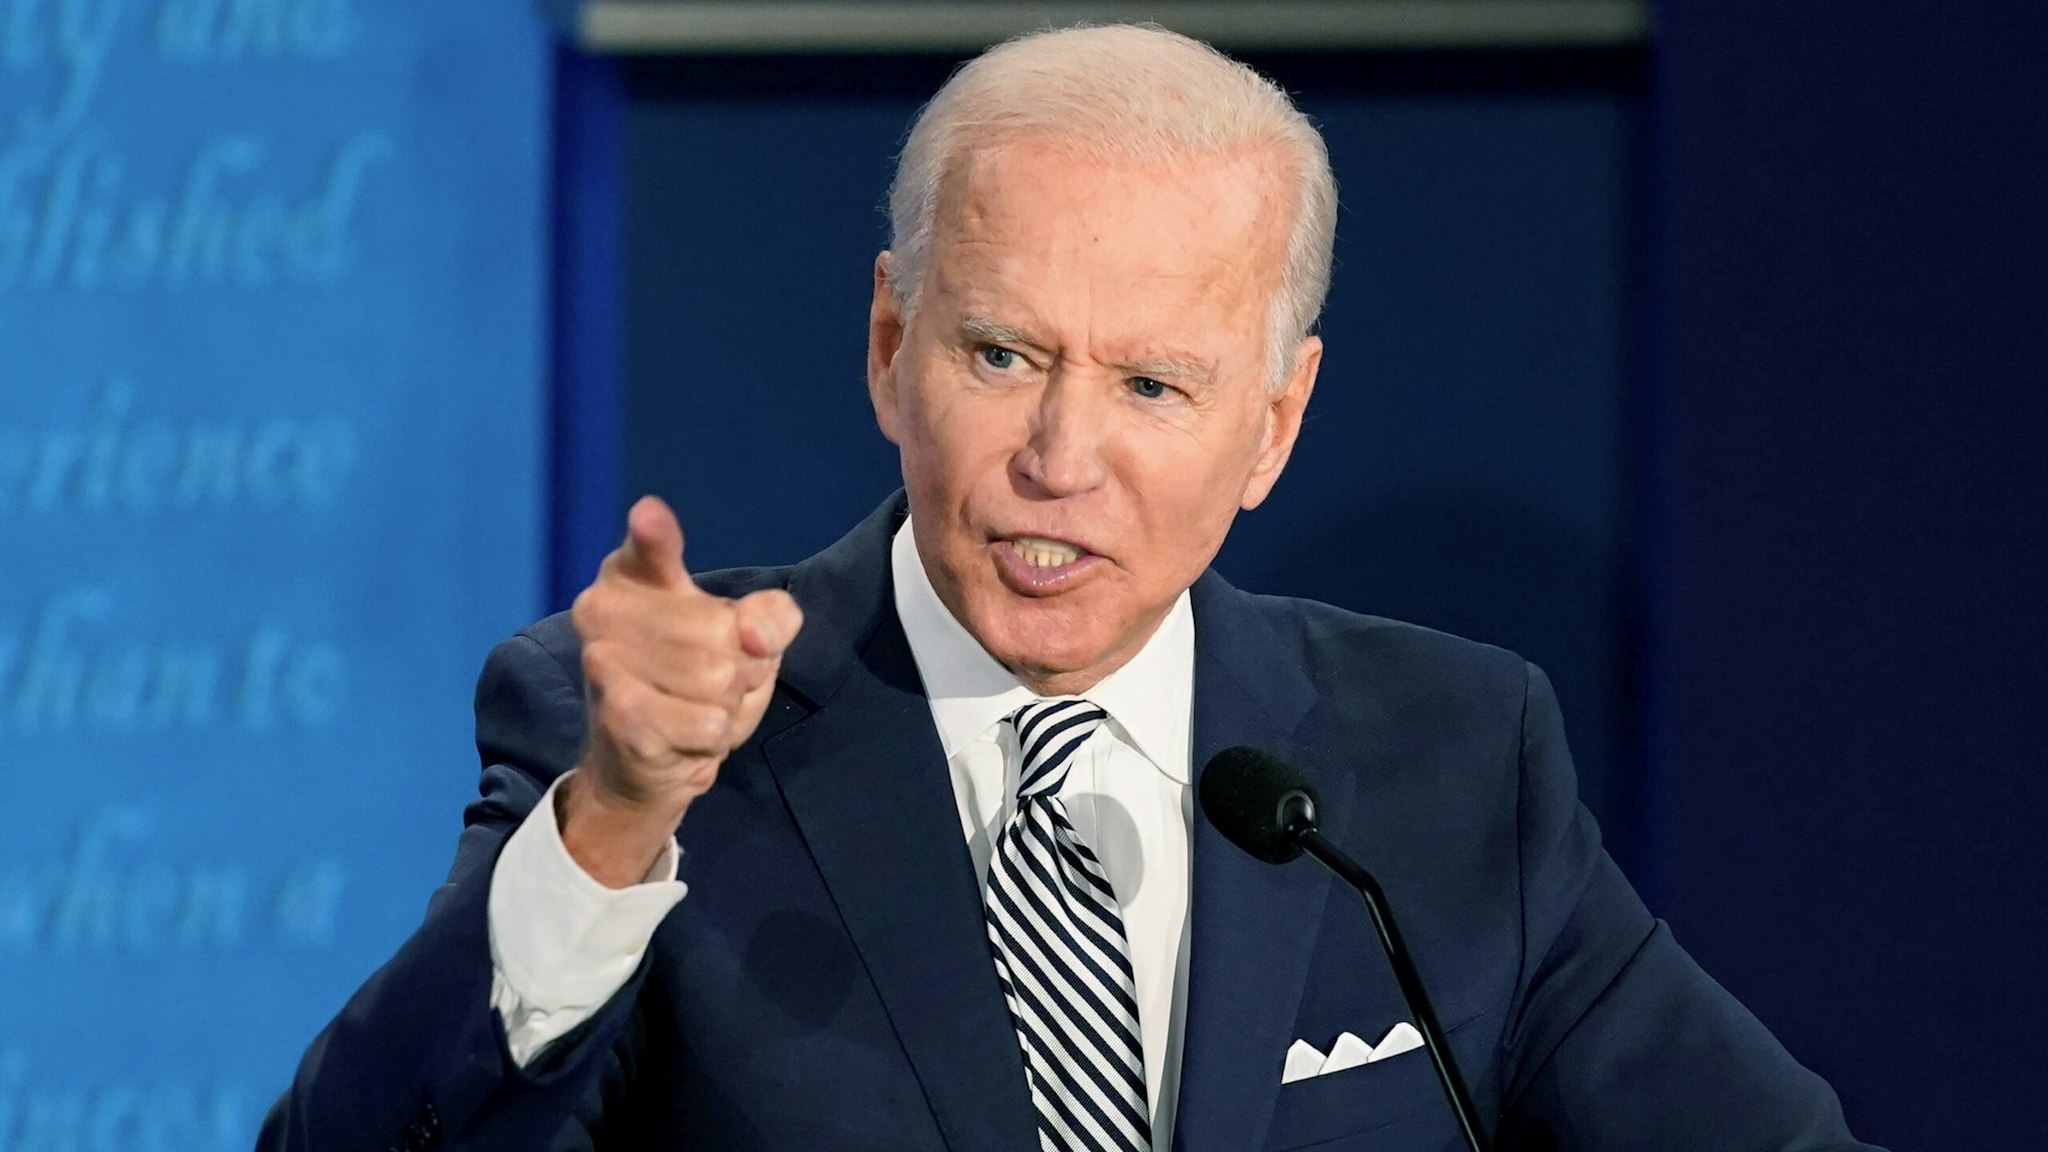 Joe Biden, 2020 Democratic presidential nominee, speaks during the first U.S. presidential debate hosted by Case Western Reserve University and the Cleveland Clinic in Cleveland, Ohio, U.S., on Tuesday, Sept. 29, 2020. Trump and Biden kick off their first debate with contentious topics like the Supreme Court and the coronavirus pandemic suddenly joined by yet another potentially explosive question -- whether the president ducked paying his taxes.